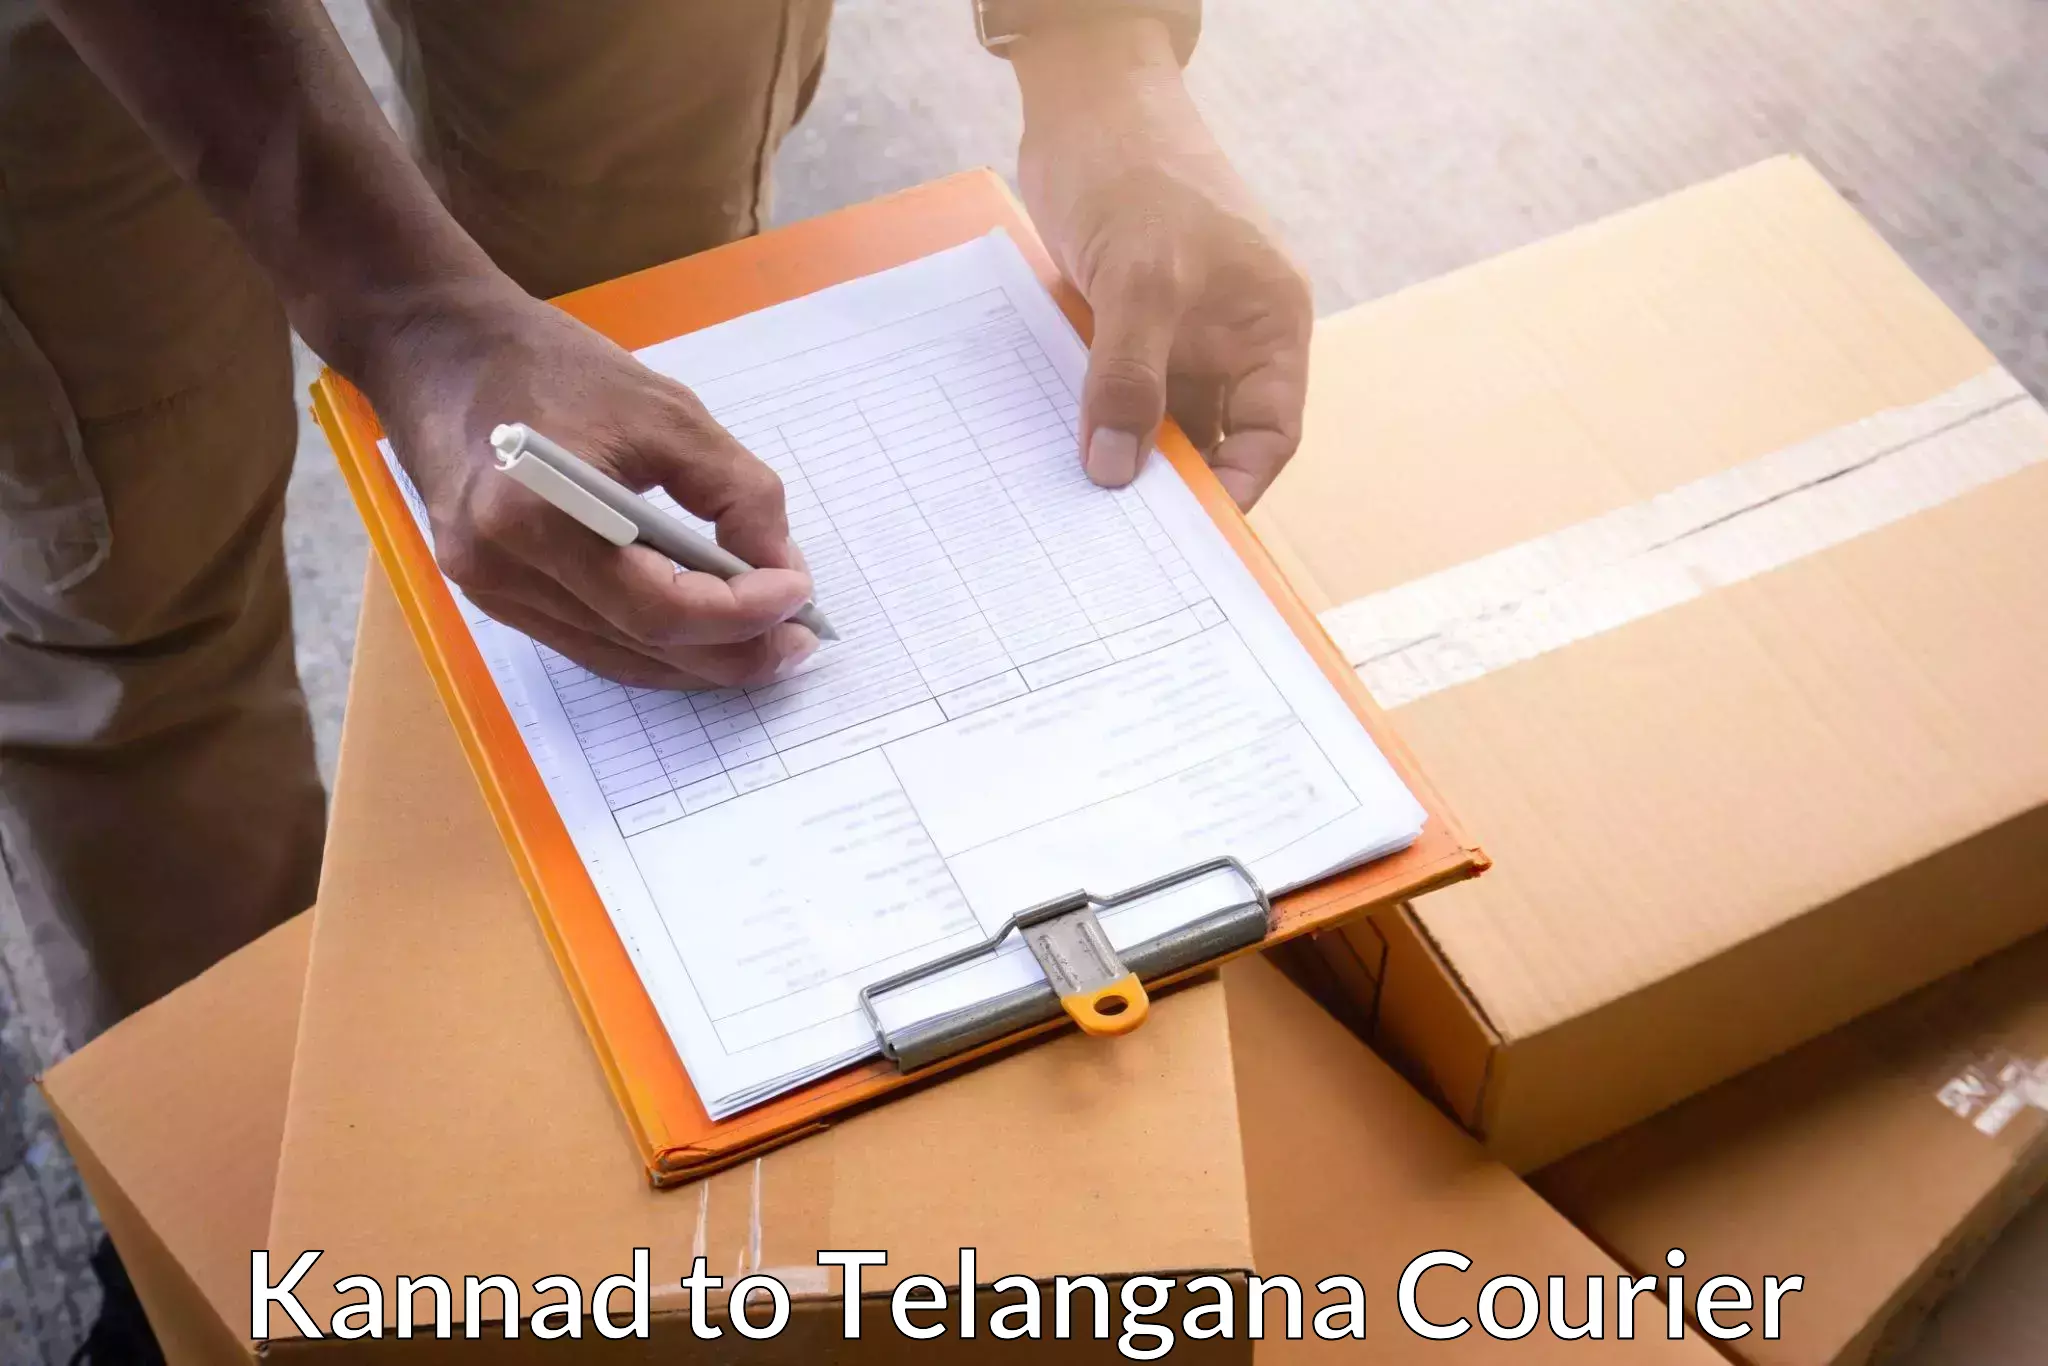 Courier service booking Kannad to Hajipur Mancherial